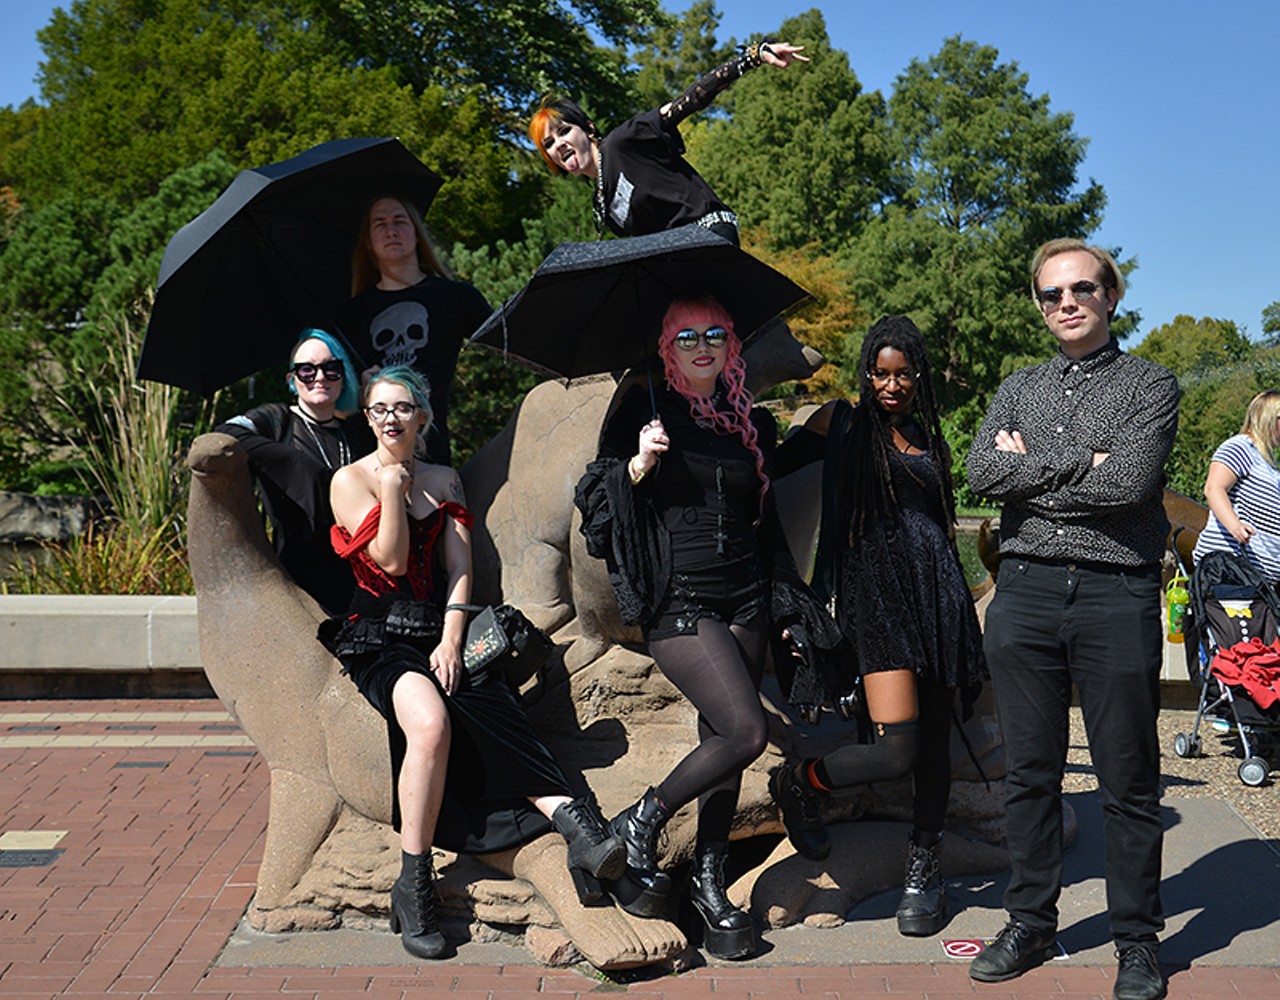 Around 50 goths came out to the St. Louis Zoo for a family friendly gathering on Sunday, Sept. 30, 2018.